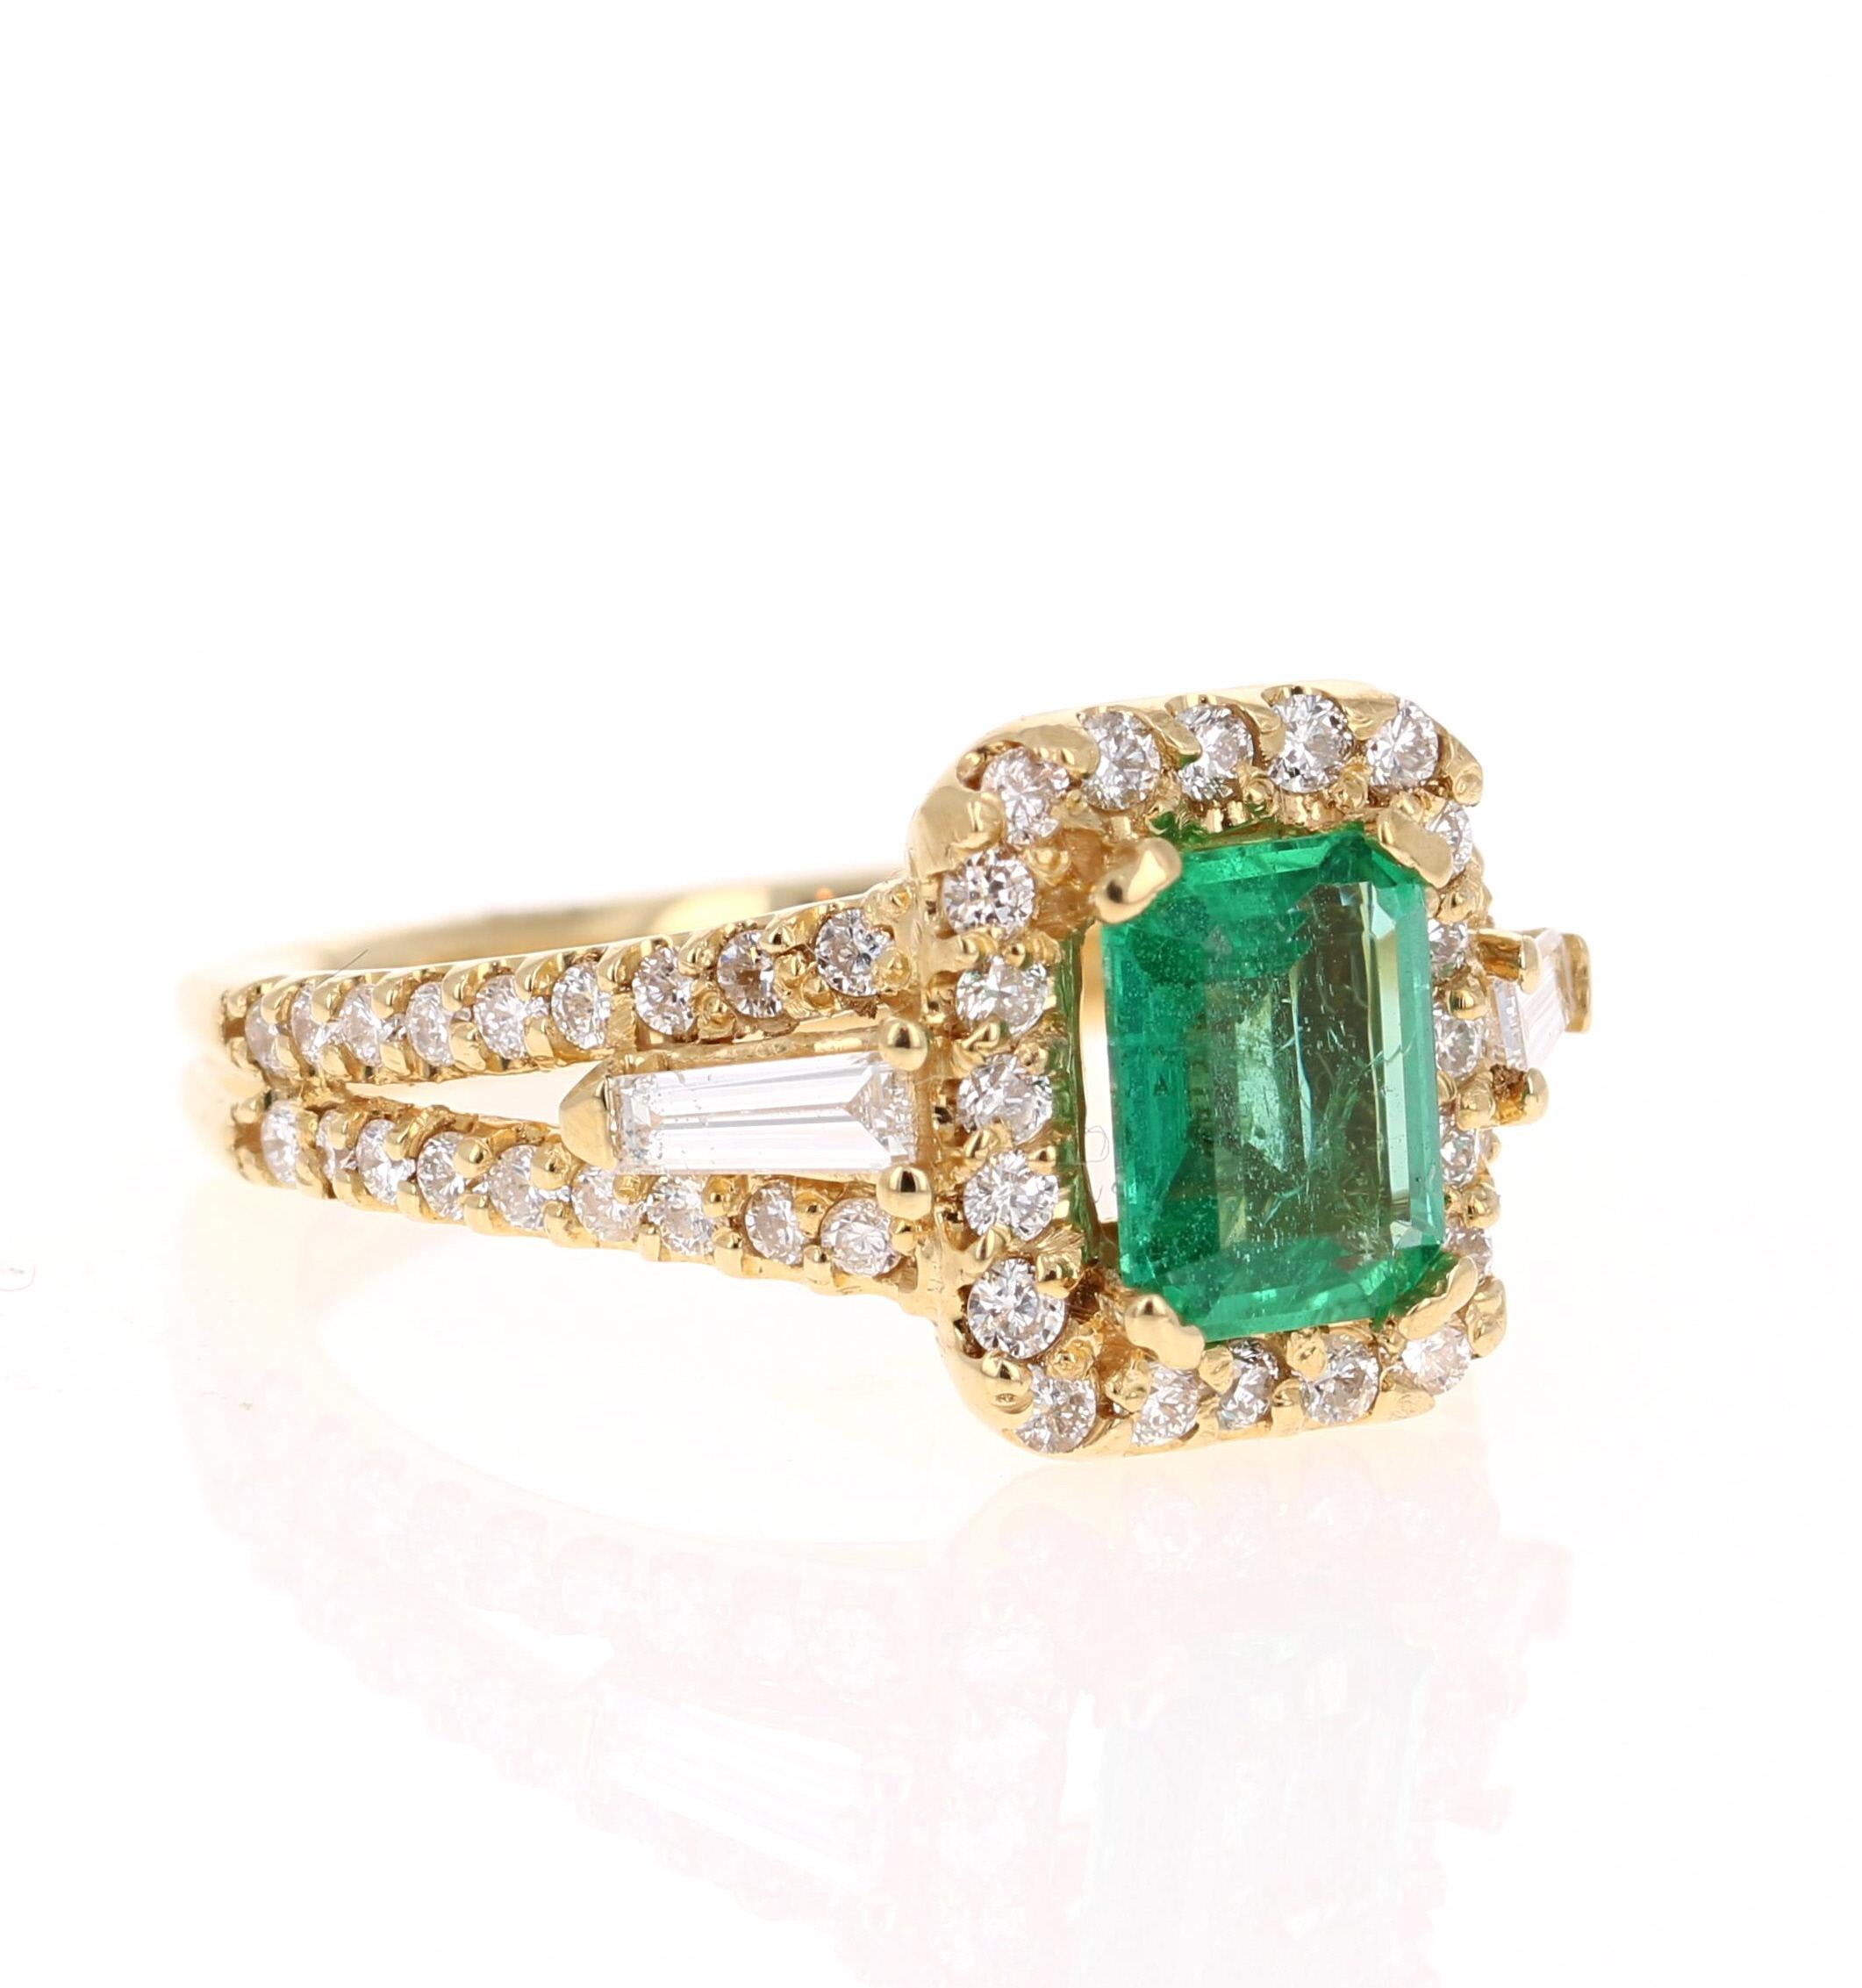 Beautiful, Delicate and Unique Emerald and Diamond Engagement Ring. 

This gorgeous ring has a 1.29 Carat Emerald Cut Emerald that is set in the center of the ring. The measurements of the Emerald are approximately 5 mm wide x 7 mm long and is GIA